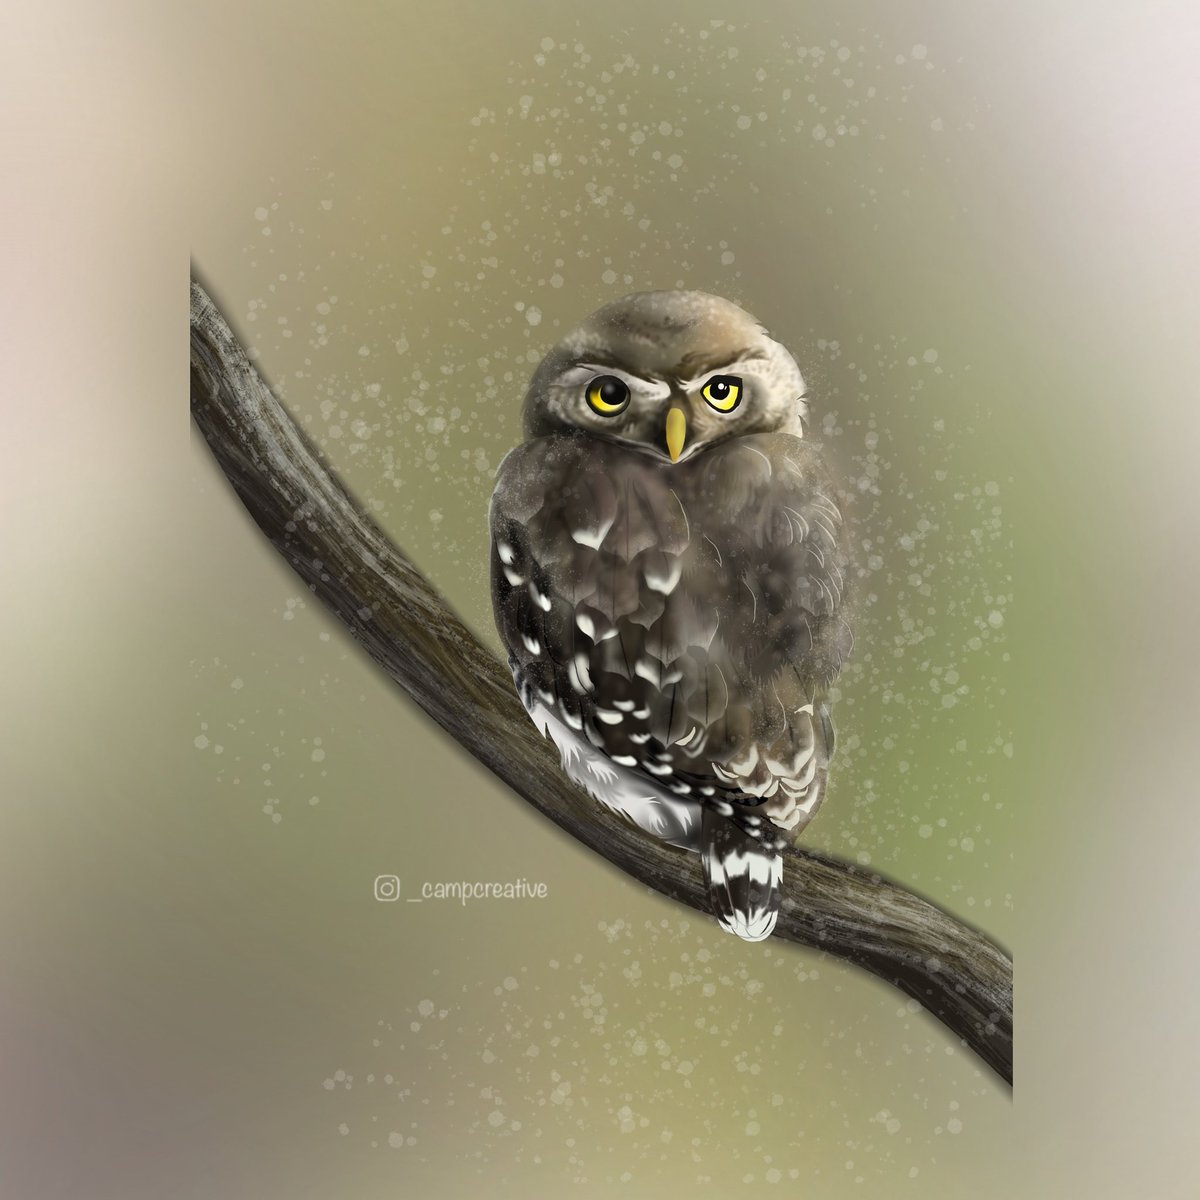 Here's an #illustration of the #endangered Forest Owlet ✨

Have you been lucky enough to spot this owl in the wild?

#owl #forestowlet #aves #birds #birdart #indianbirds #IndiAves #wildlife #iucnredlist #EndangeredSpeciesDay #endemic #procreate